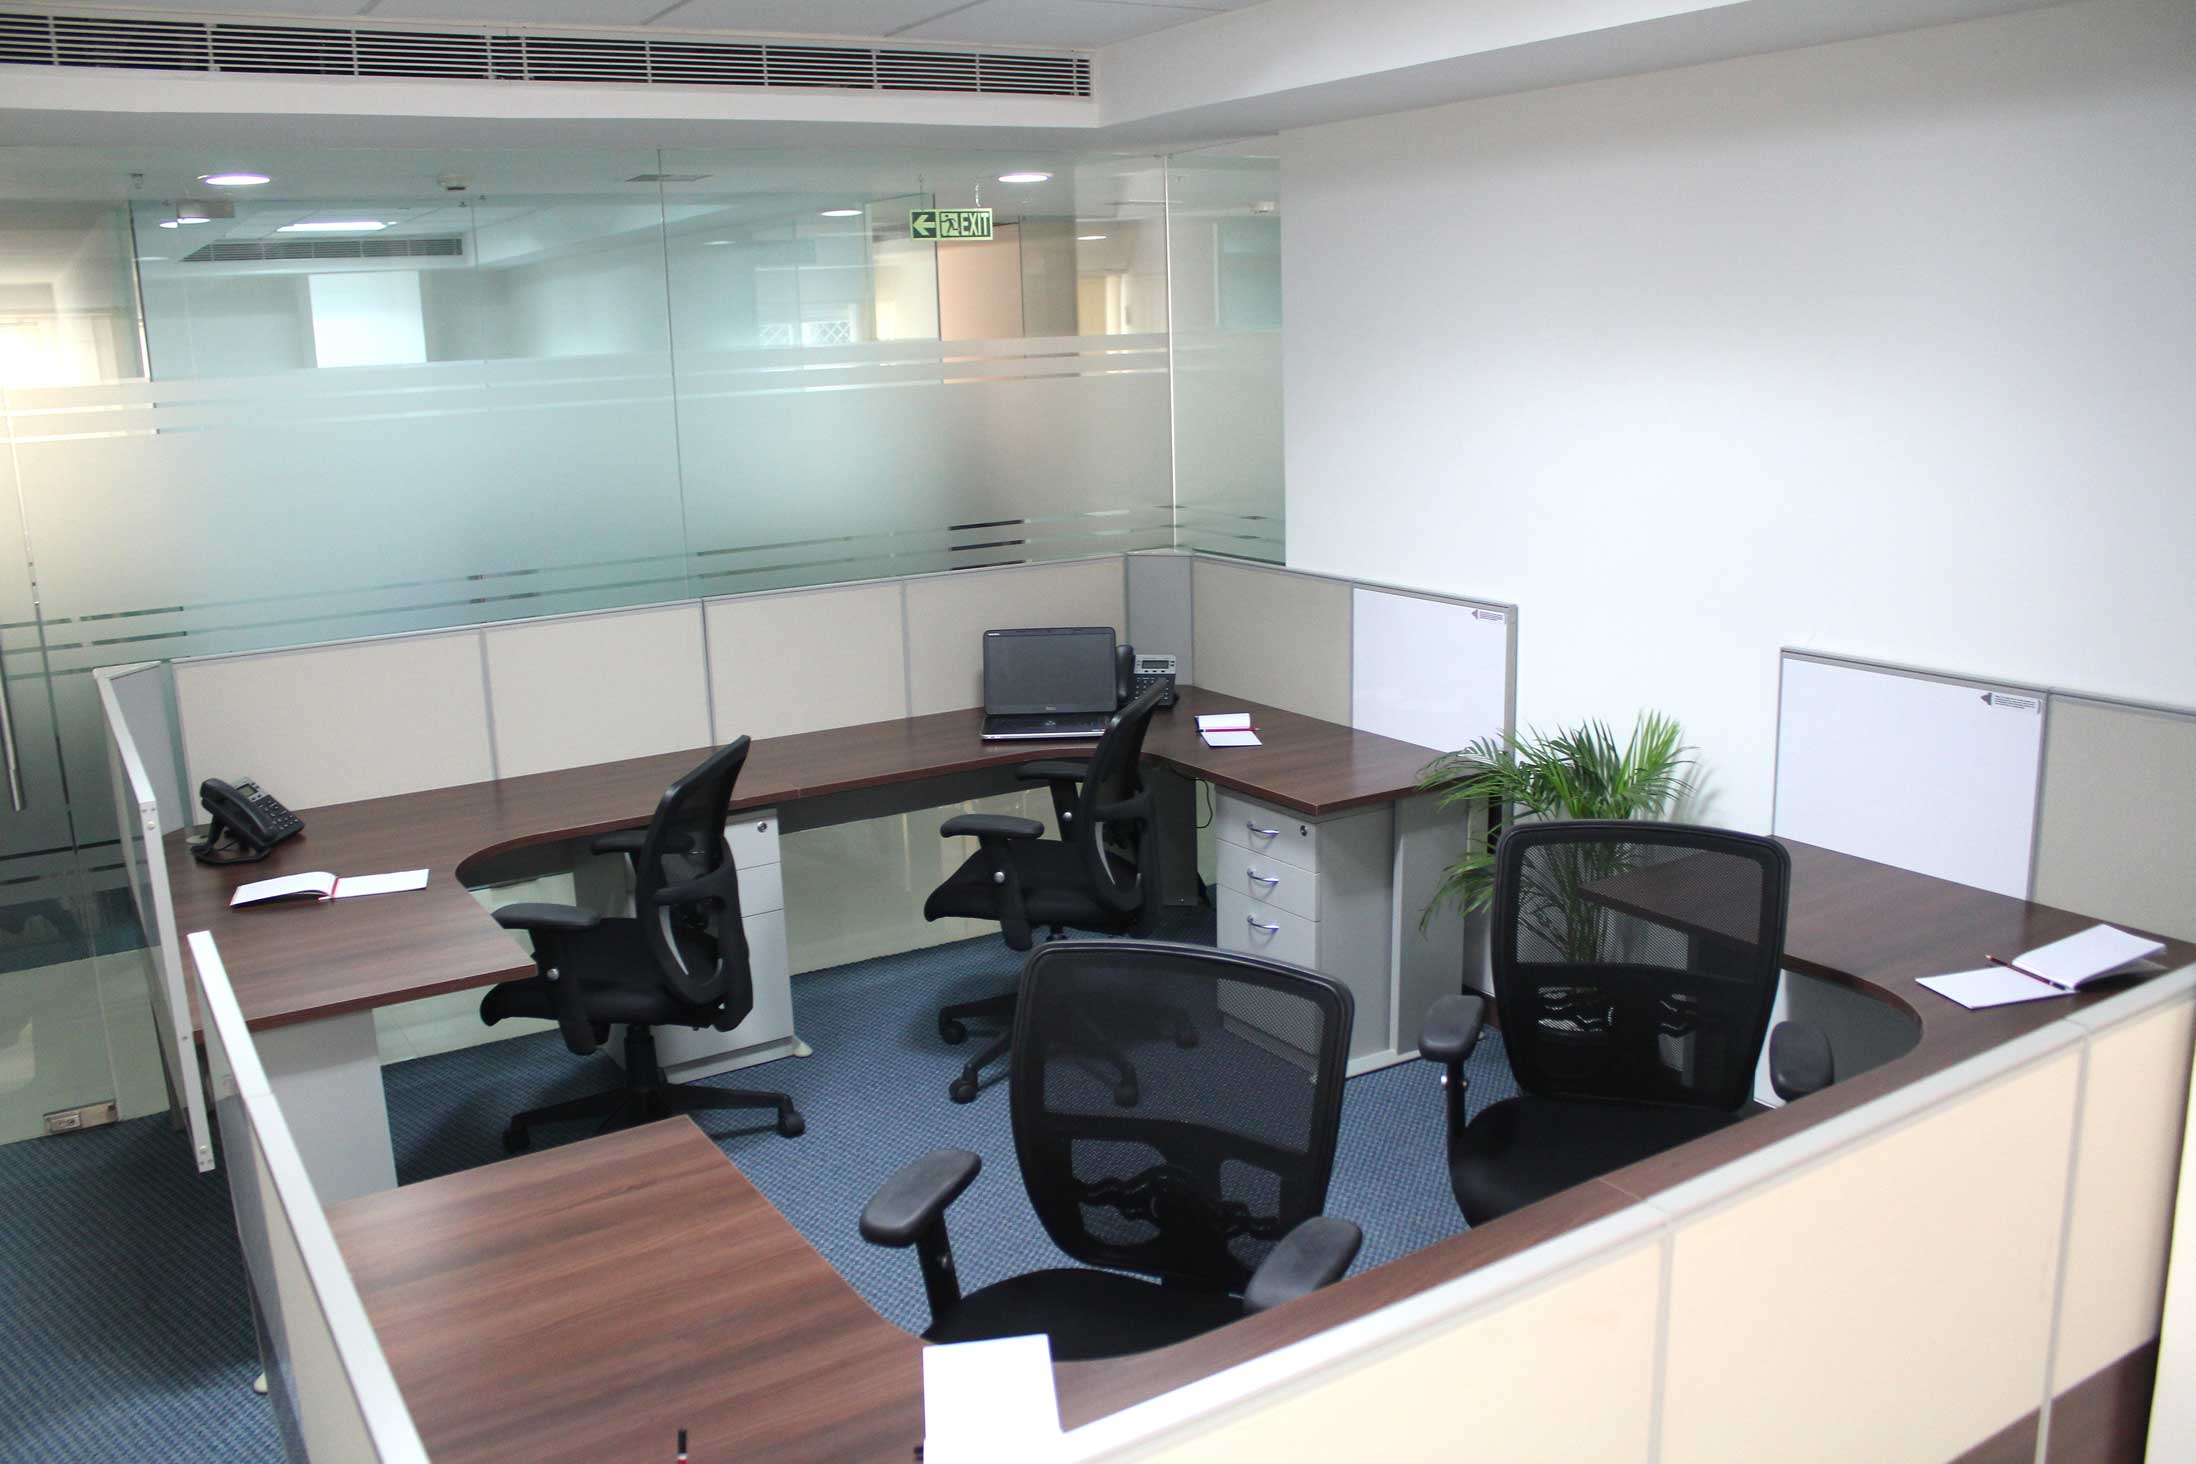  Sale of commercial property with indian top financial service company in  hitech city